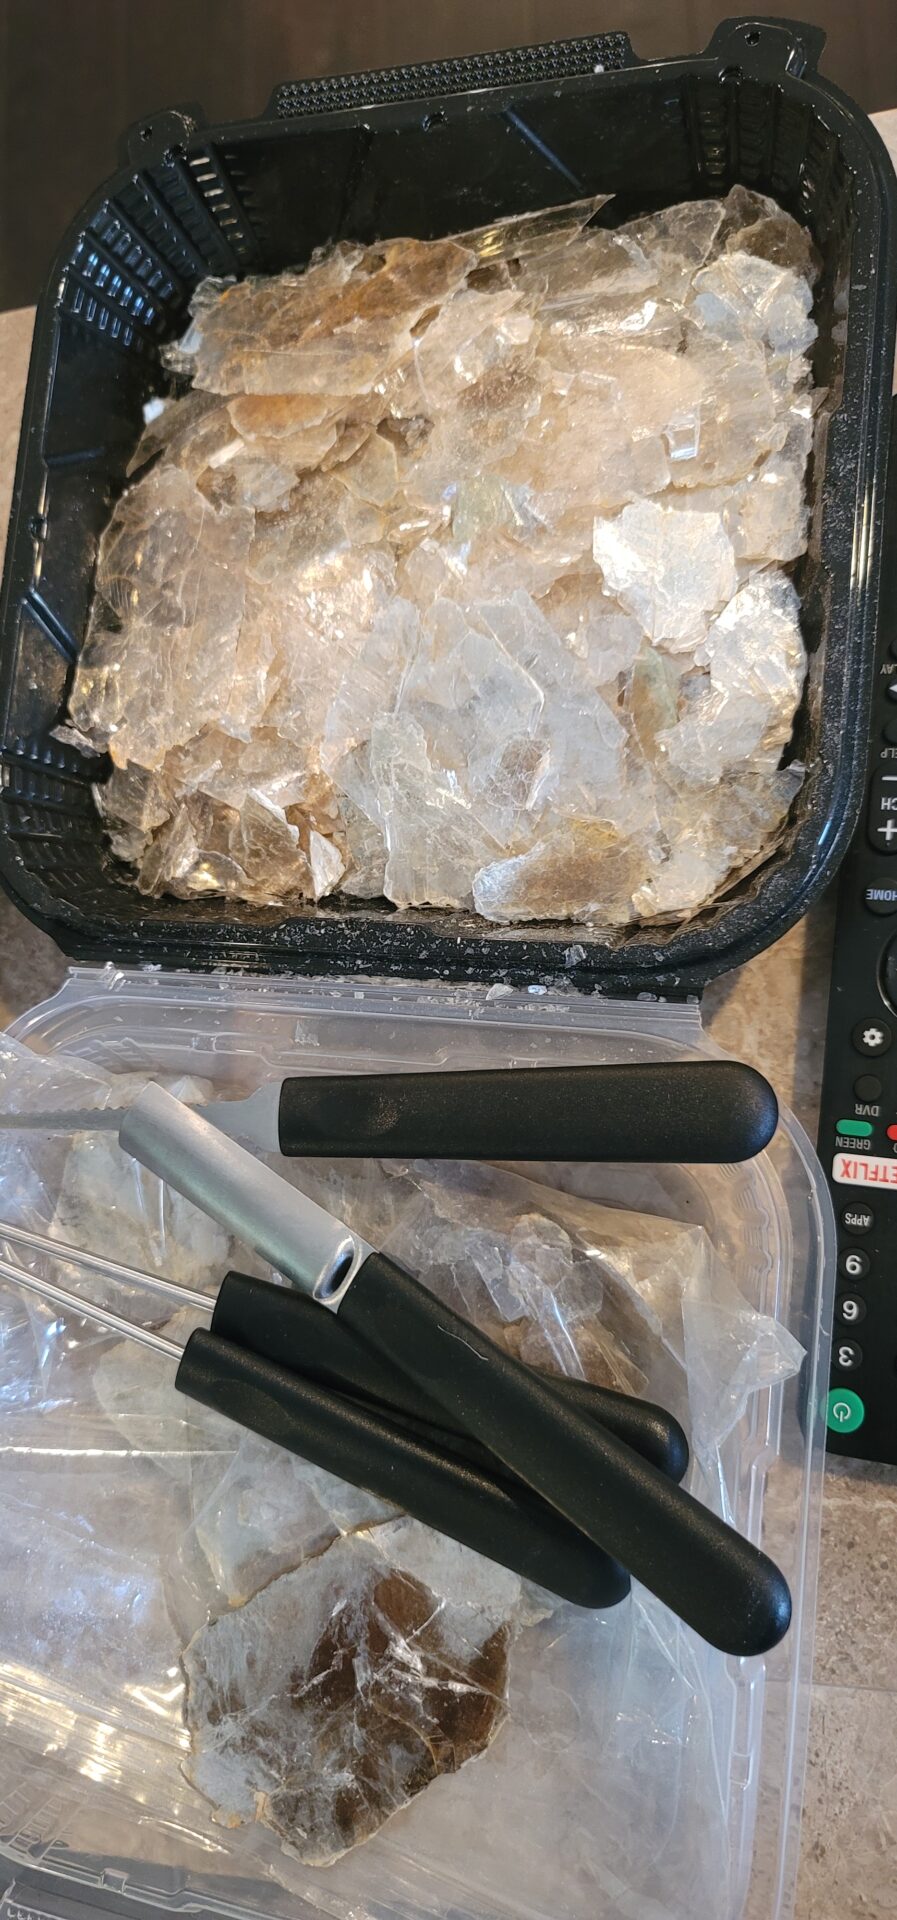 buckets of crystals and tools